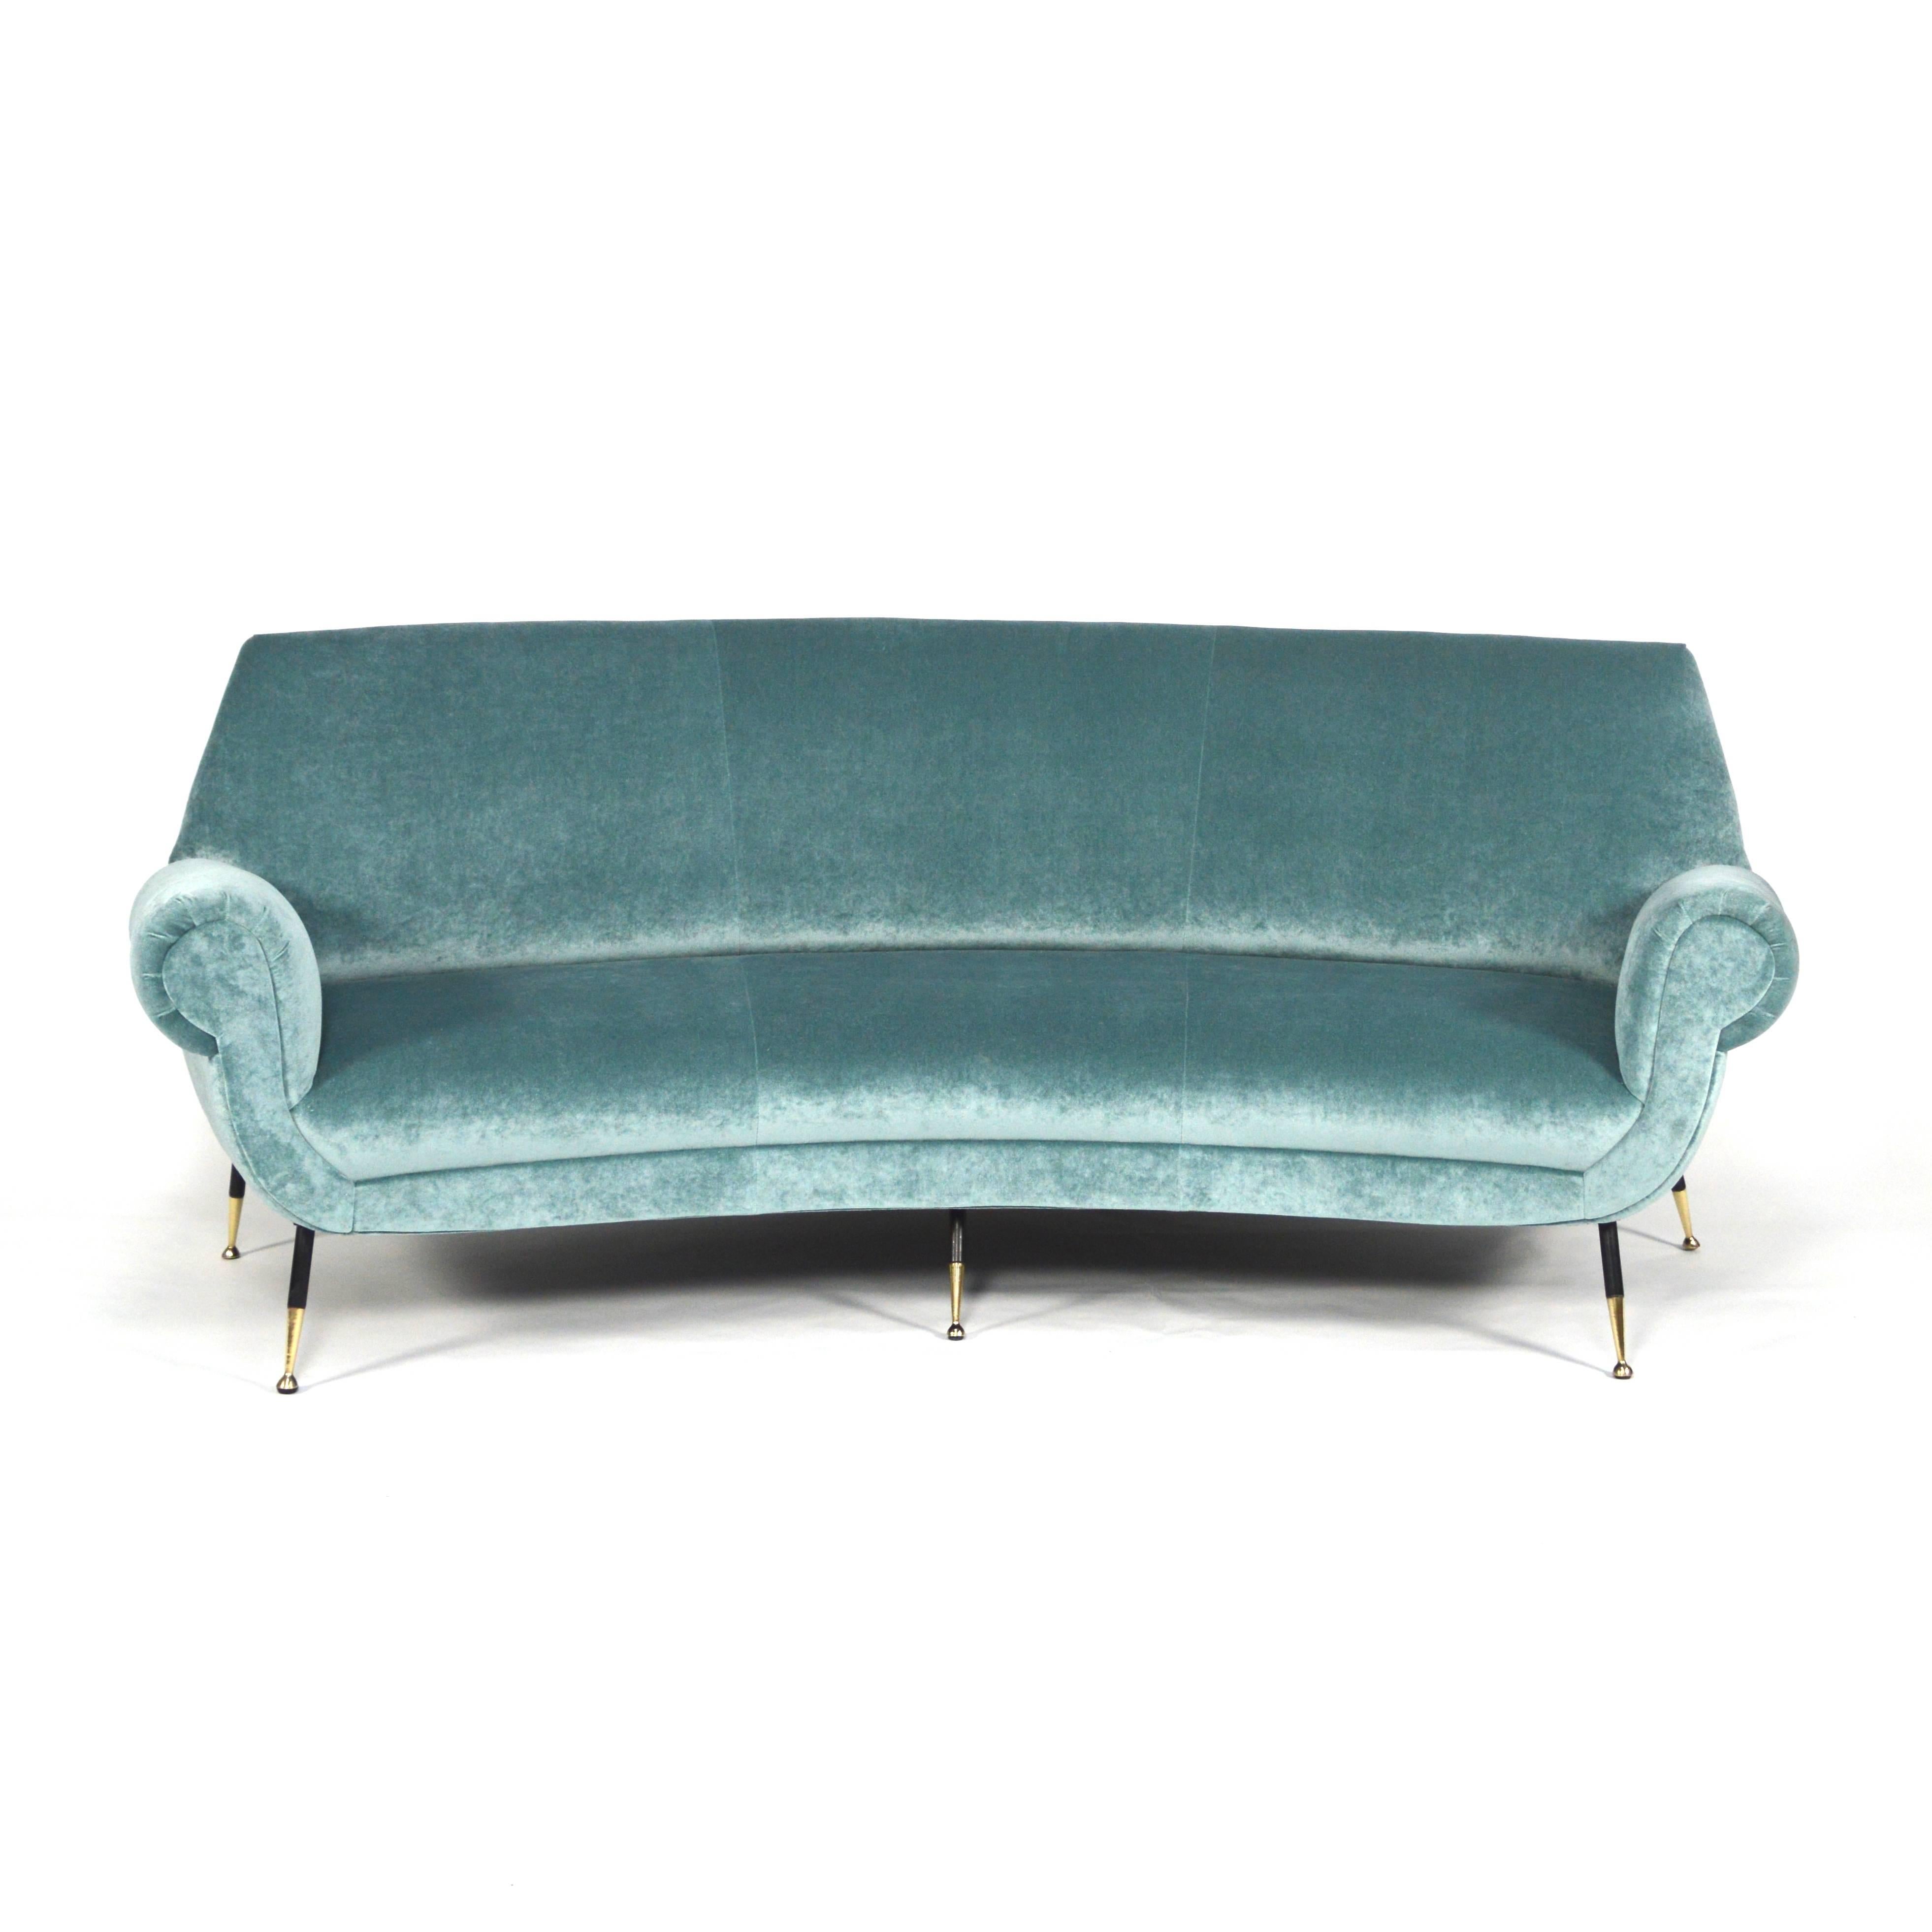 Gorgeous rare curved sofa by Gigi Radice for Minotti, Italy. The sofa is completely refurbished with new foam interior and re-upholstered in a beautiful aqua blue/green velvet by JAB ‘Urban Velvets’.

Upholstered by one of the best Dutch craftsman